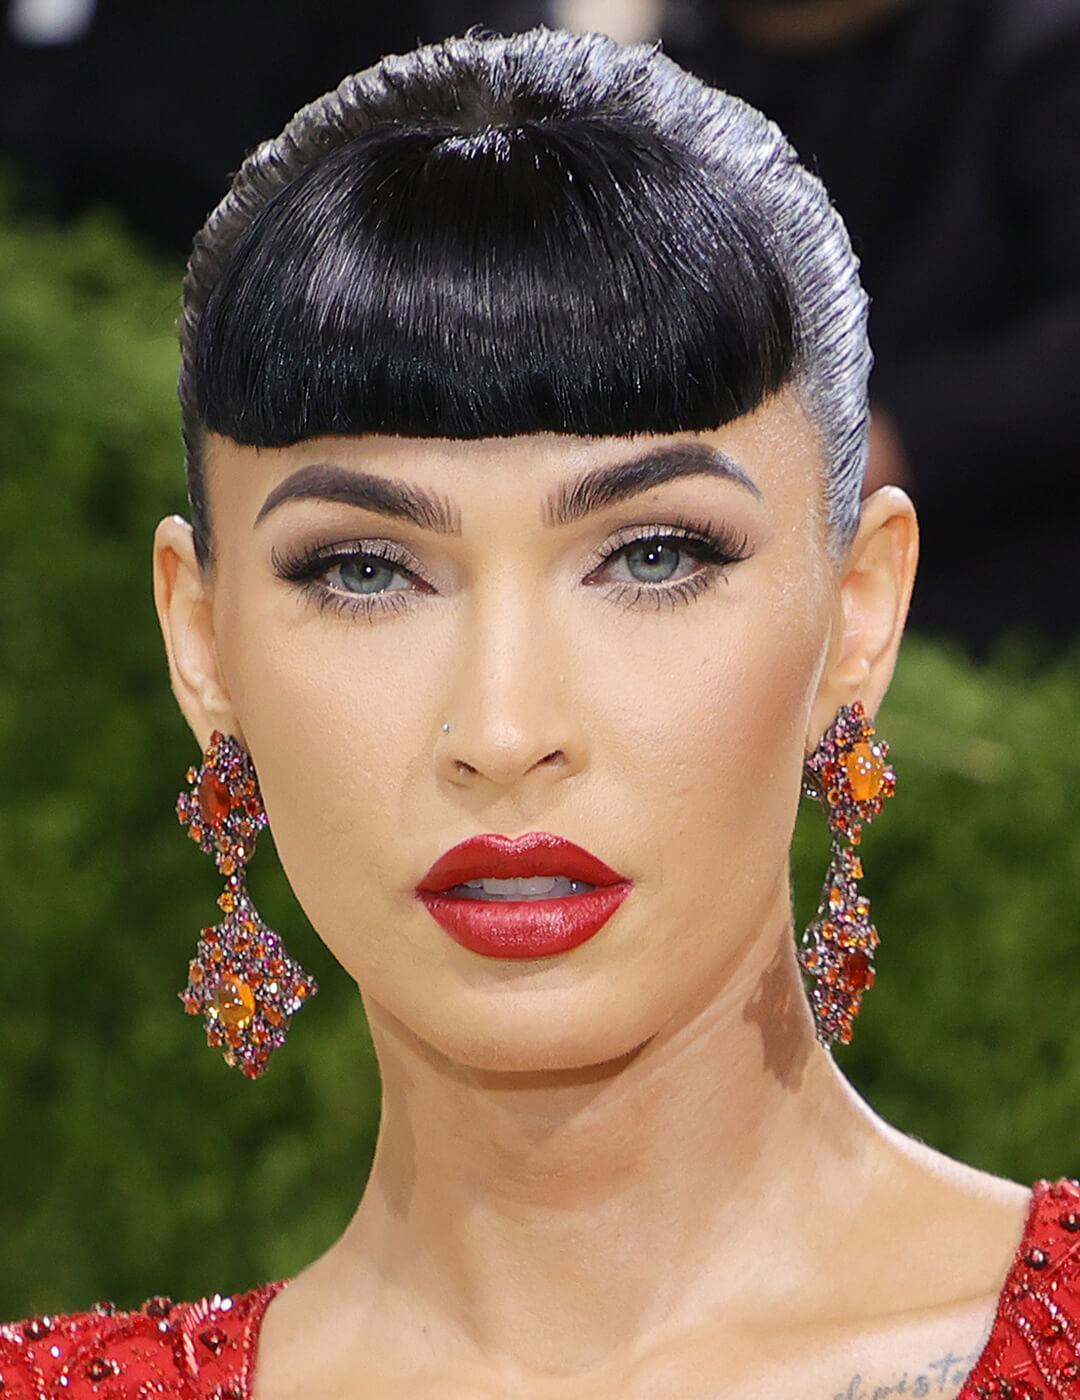 Megan Fox looking glam in a slick hairstyle with full bangs, red-stoned dangling earrings, and minimal makeup look paired with bright red lips